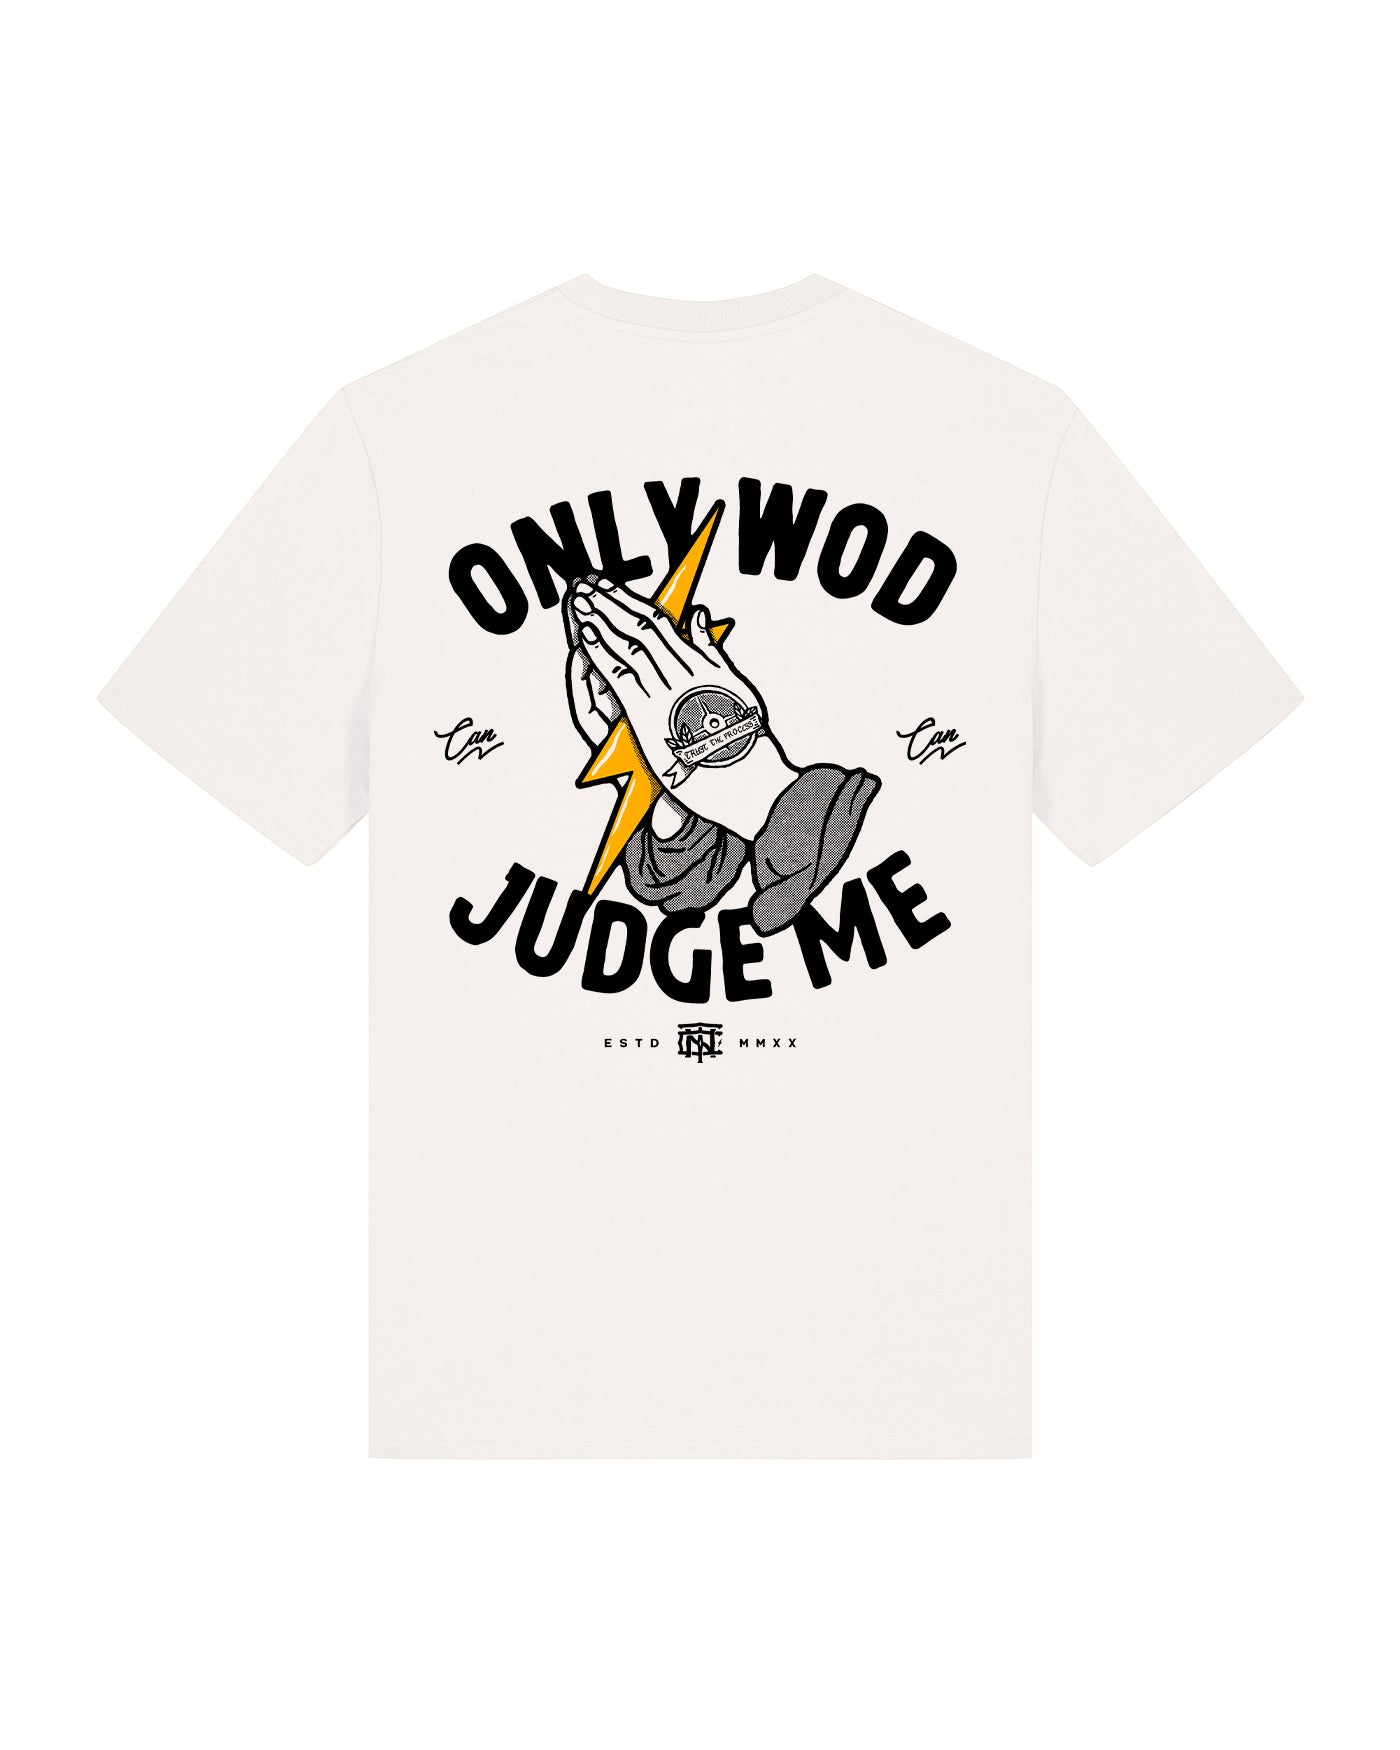 Only Wod Can Judge Me T-Shirt